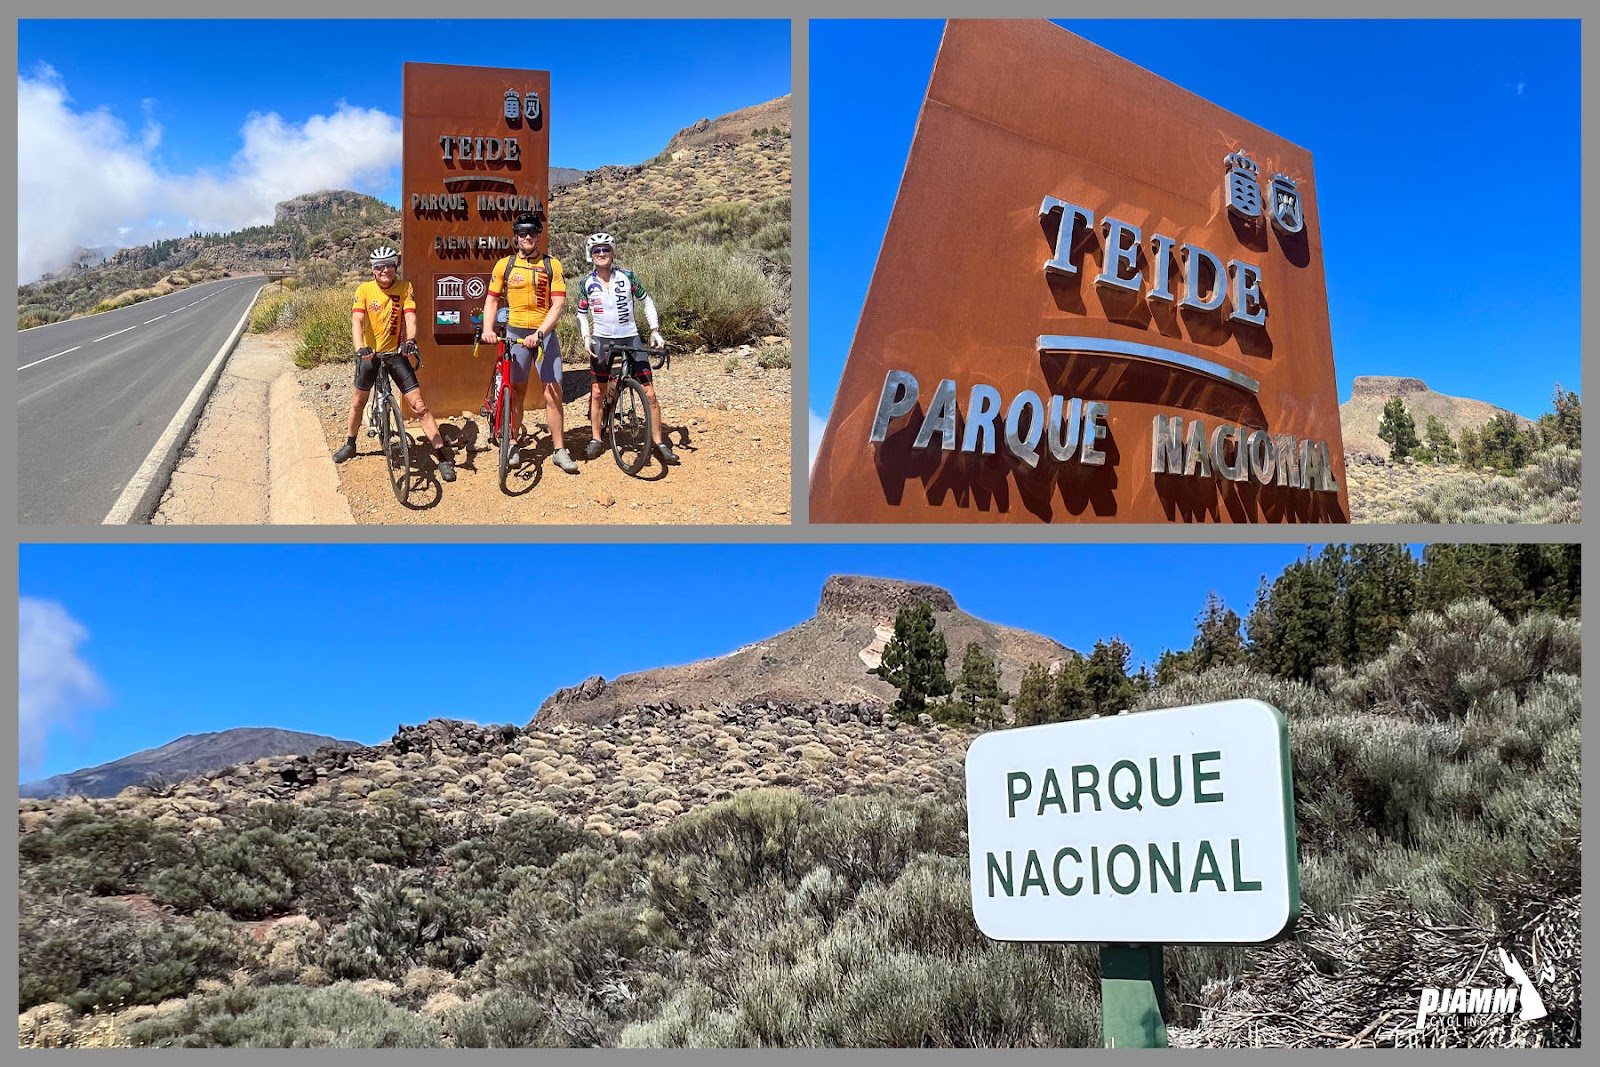 PJAMM Cyclists stand with bikes in front of sign for Teide Parque Nacional